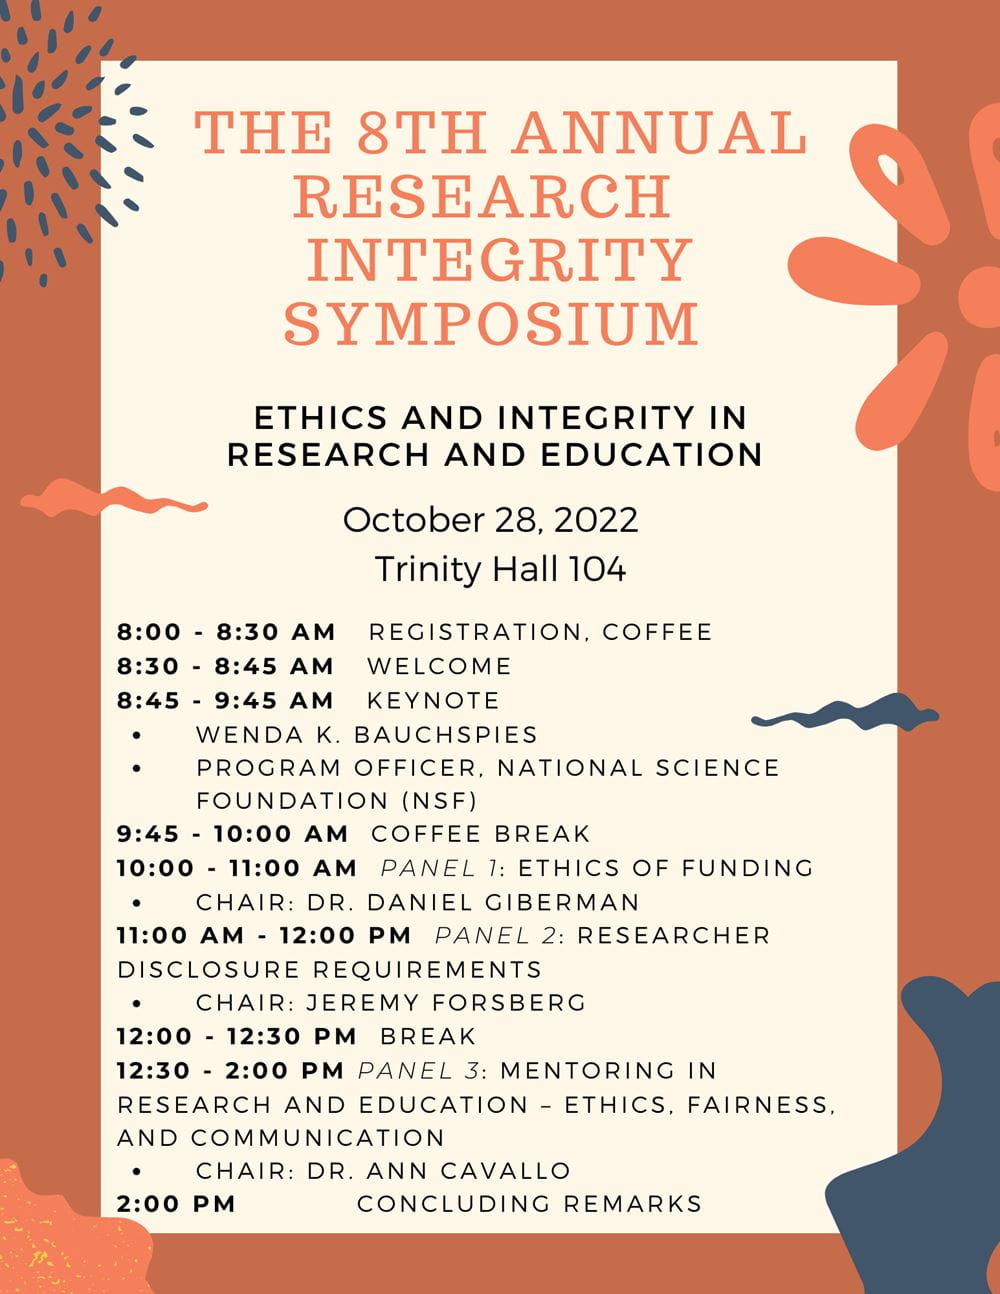 Schedule of Events for RCR Symposium 2022